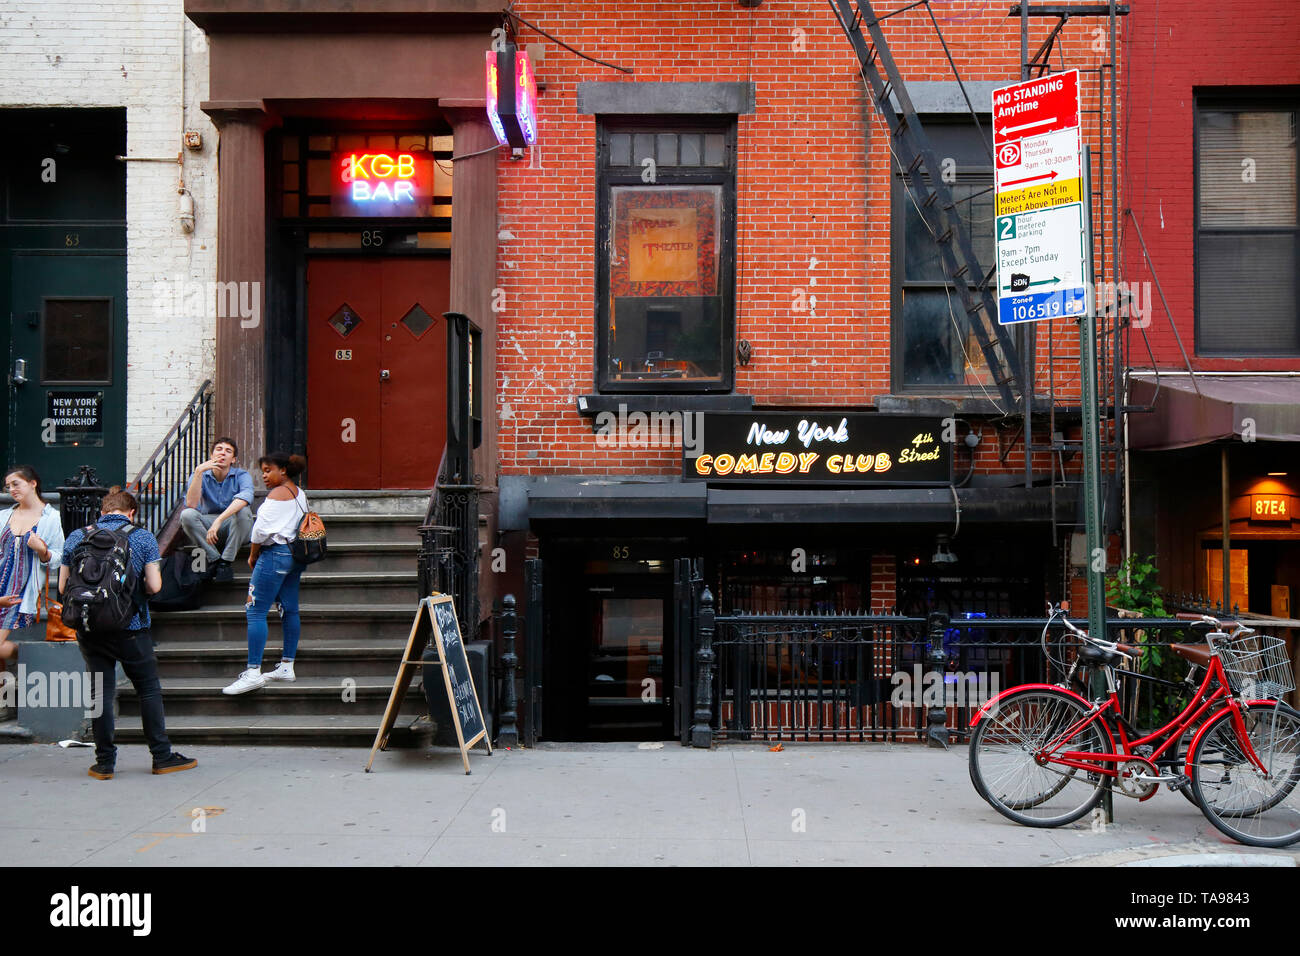 The Red Room, KGB Bar, New York Comedy Club, 85 E 4th St, New York, NY. exterior storefront of a bar and comedy club in the East Village of Manhattan. Stock Photo